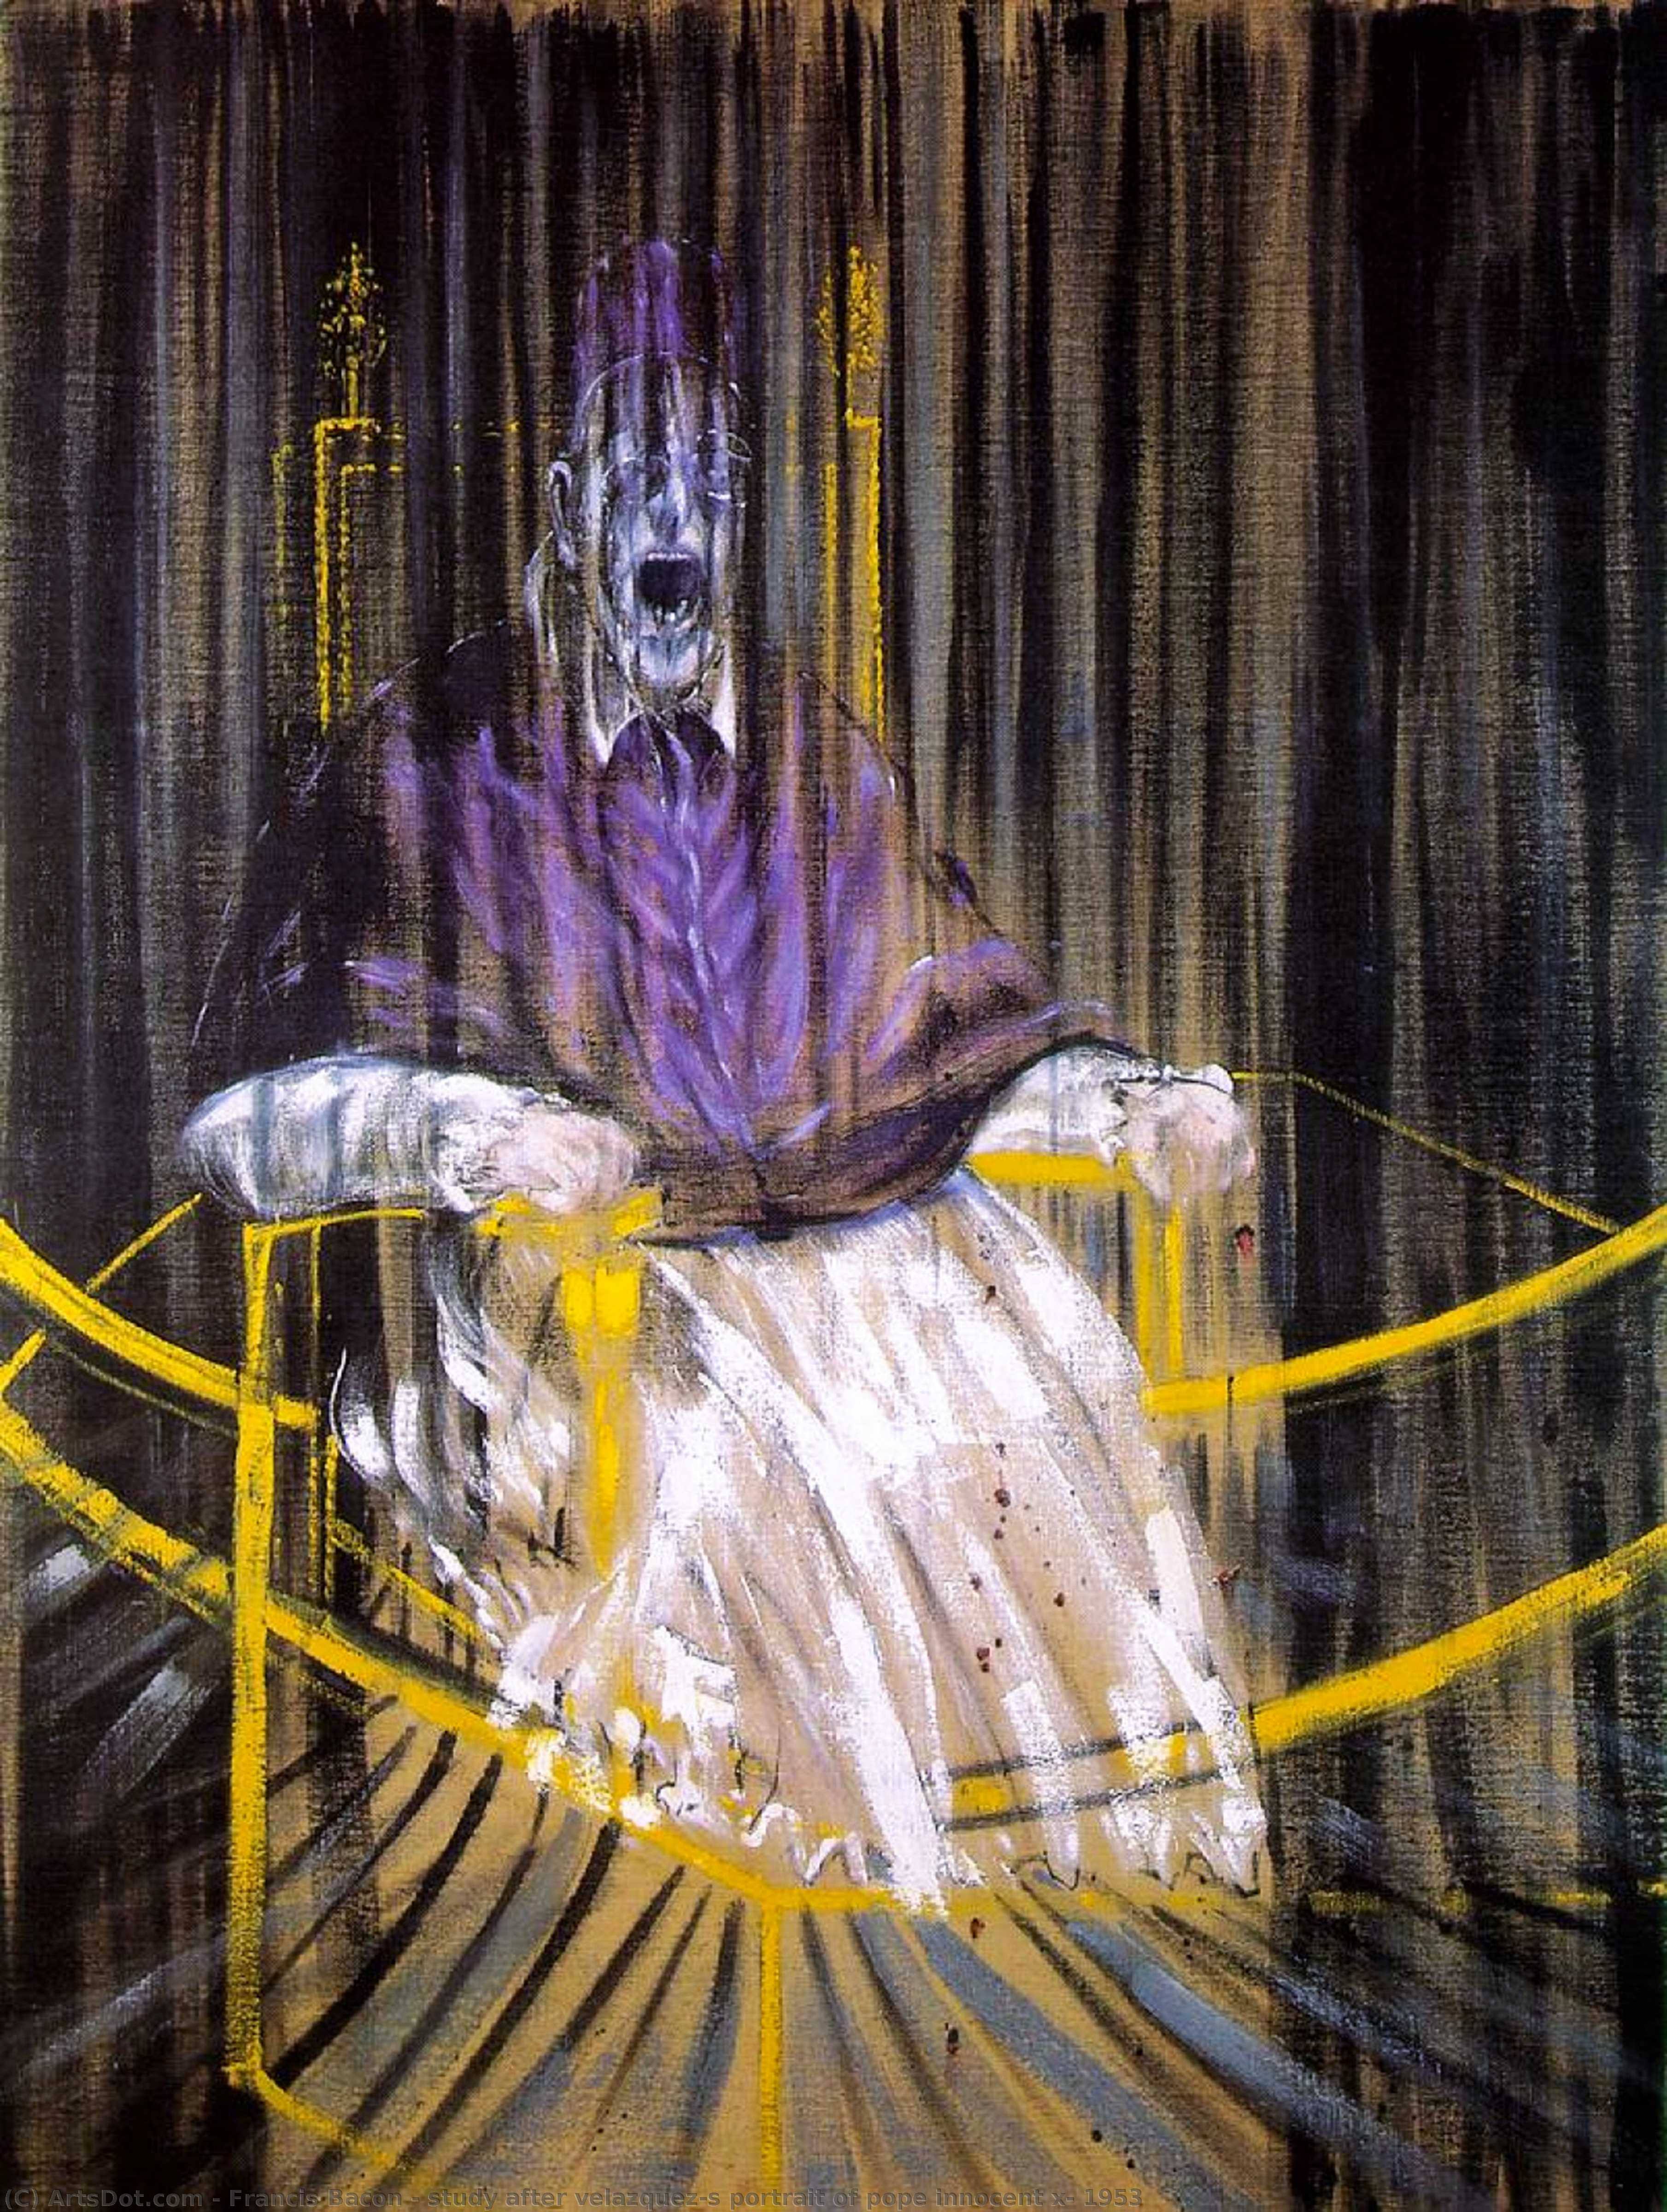  Museum Art Reproductions study after velazquez`s portrait of pope innocent x, 1953, 1953 by Francis Bacon (Inspired By) (1909-1992, Ireland) | ArtsDot.com